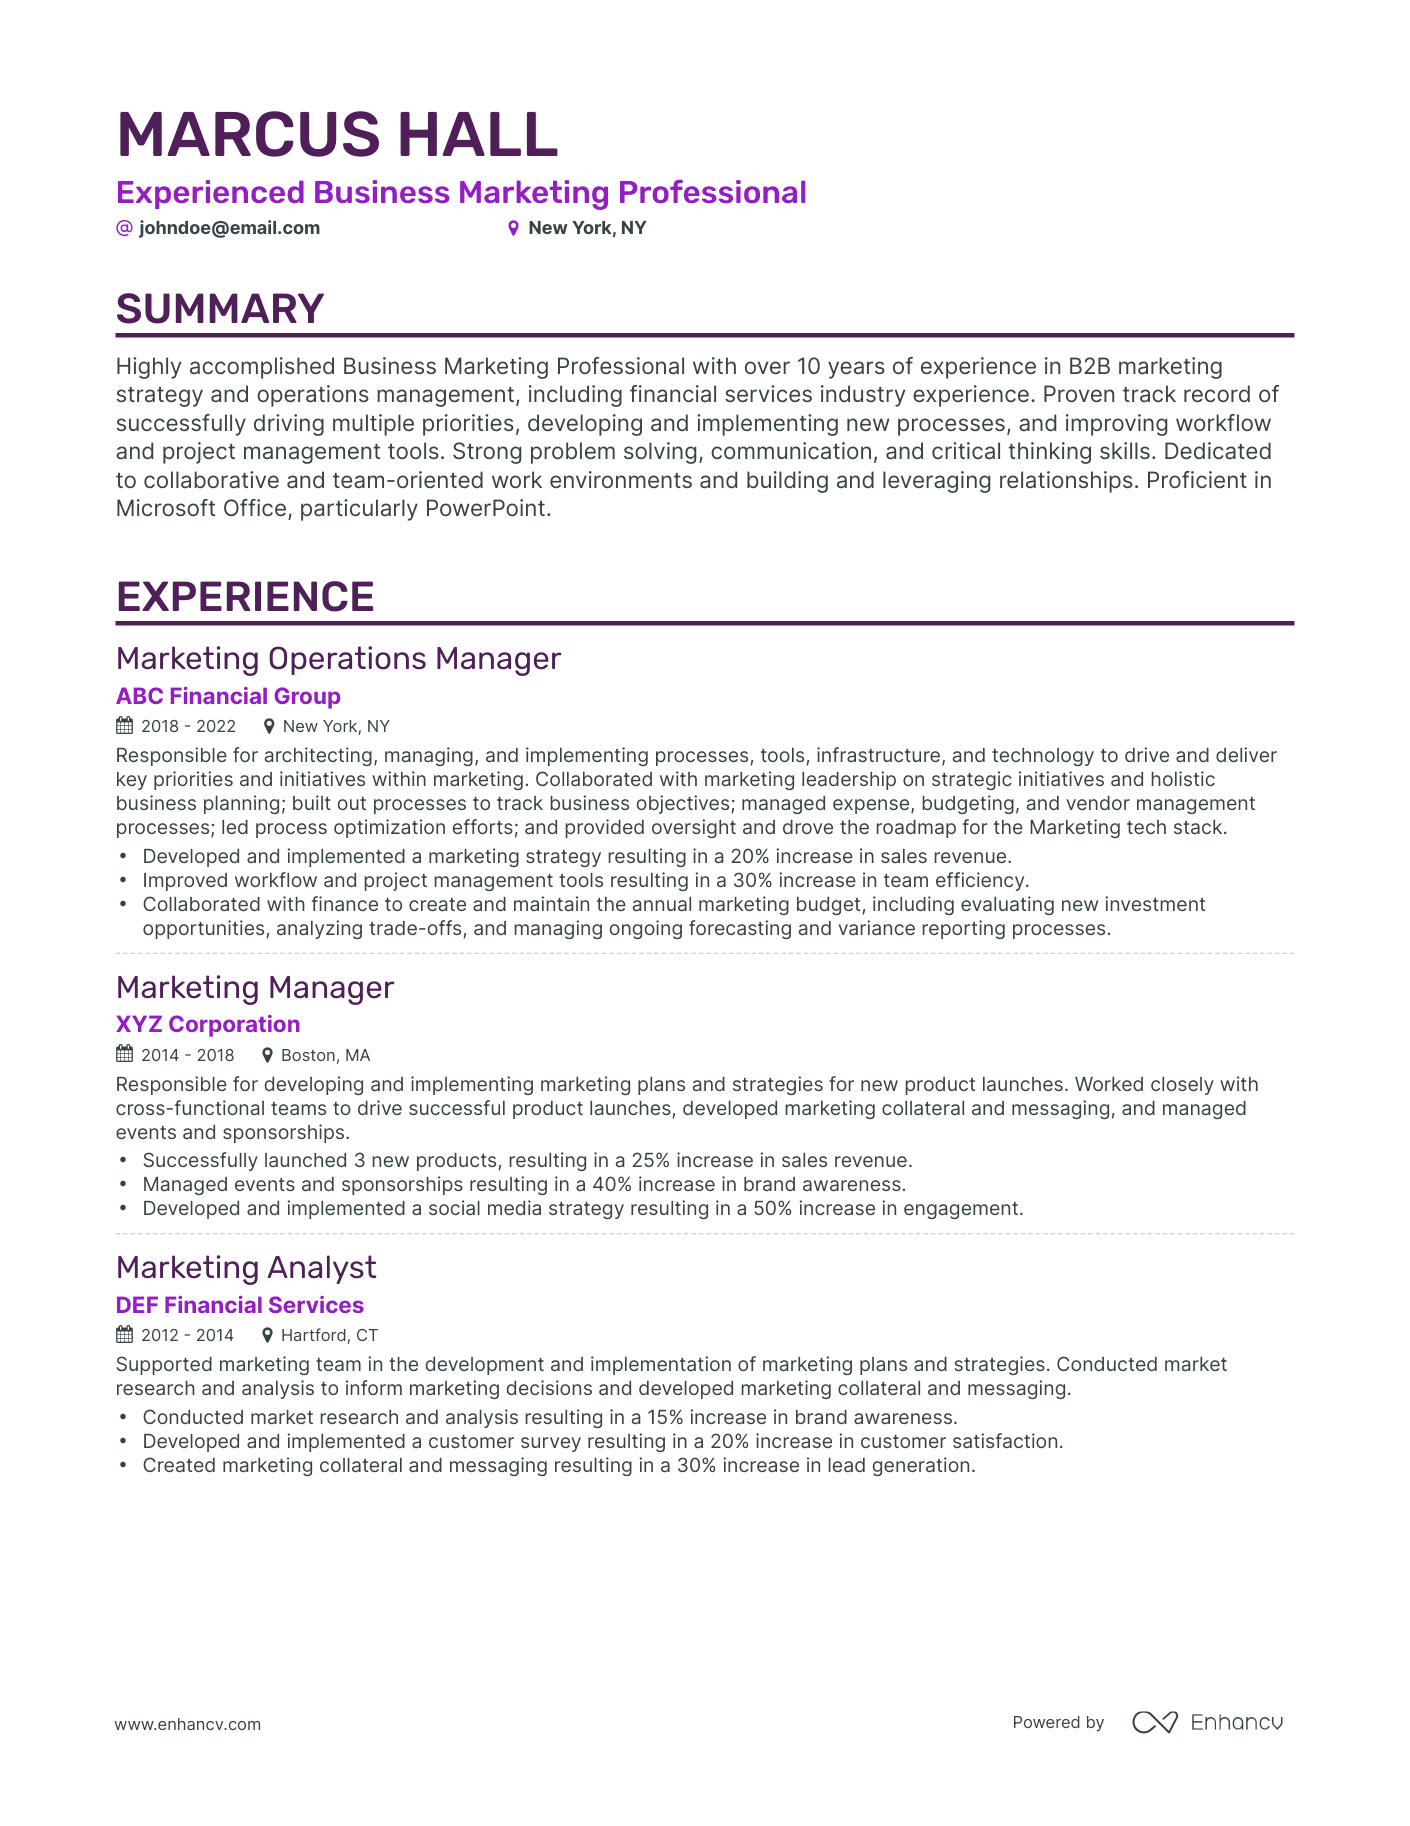 Classic Business Marketing Resume Template